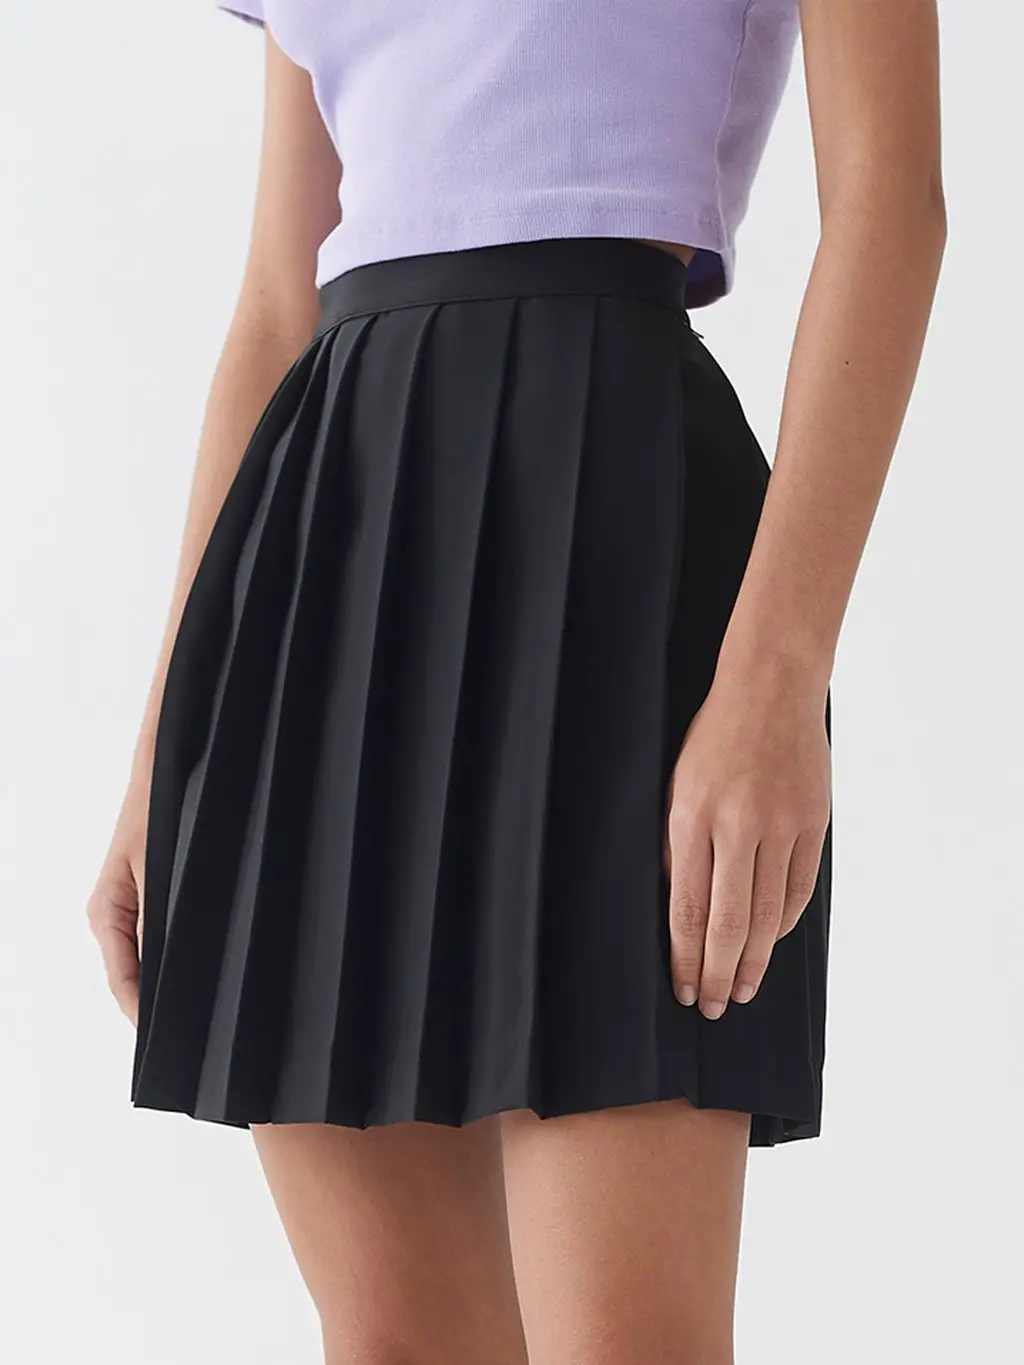 20 Different Types Of SKIRTS You Need To Know!! – Sewing Skills